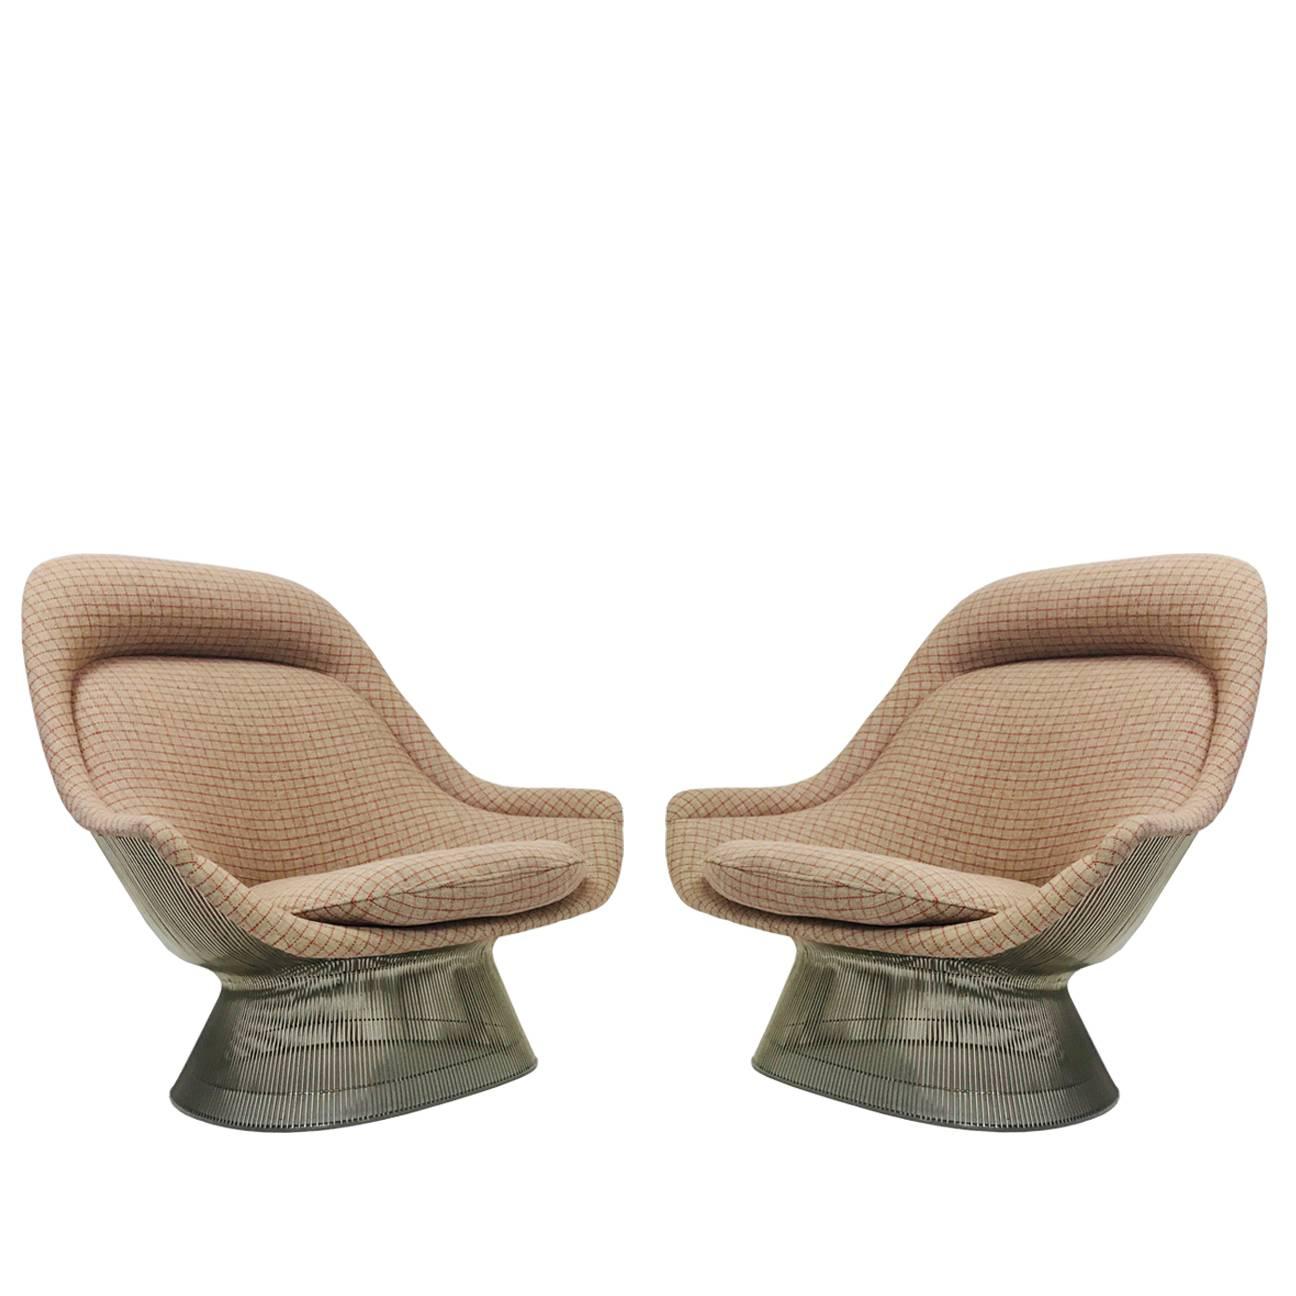 Pair of Lounge Chairs by Warren Platner